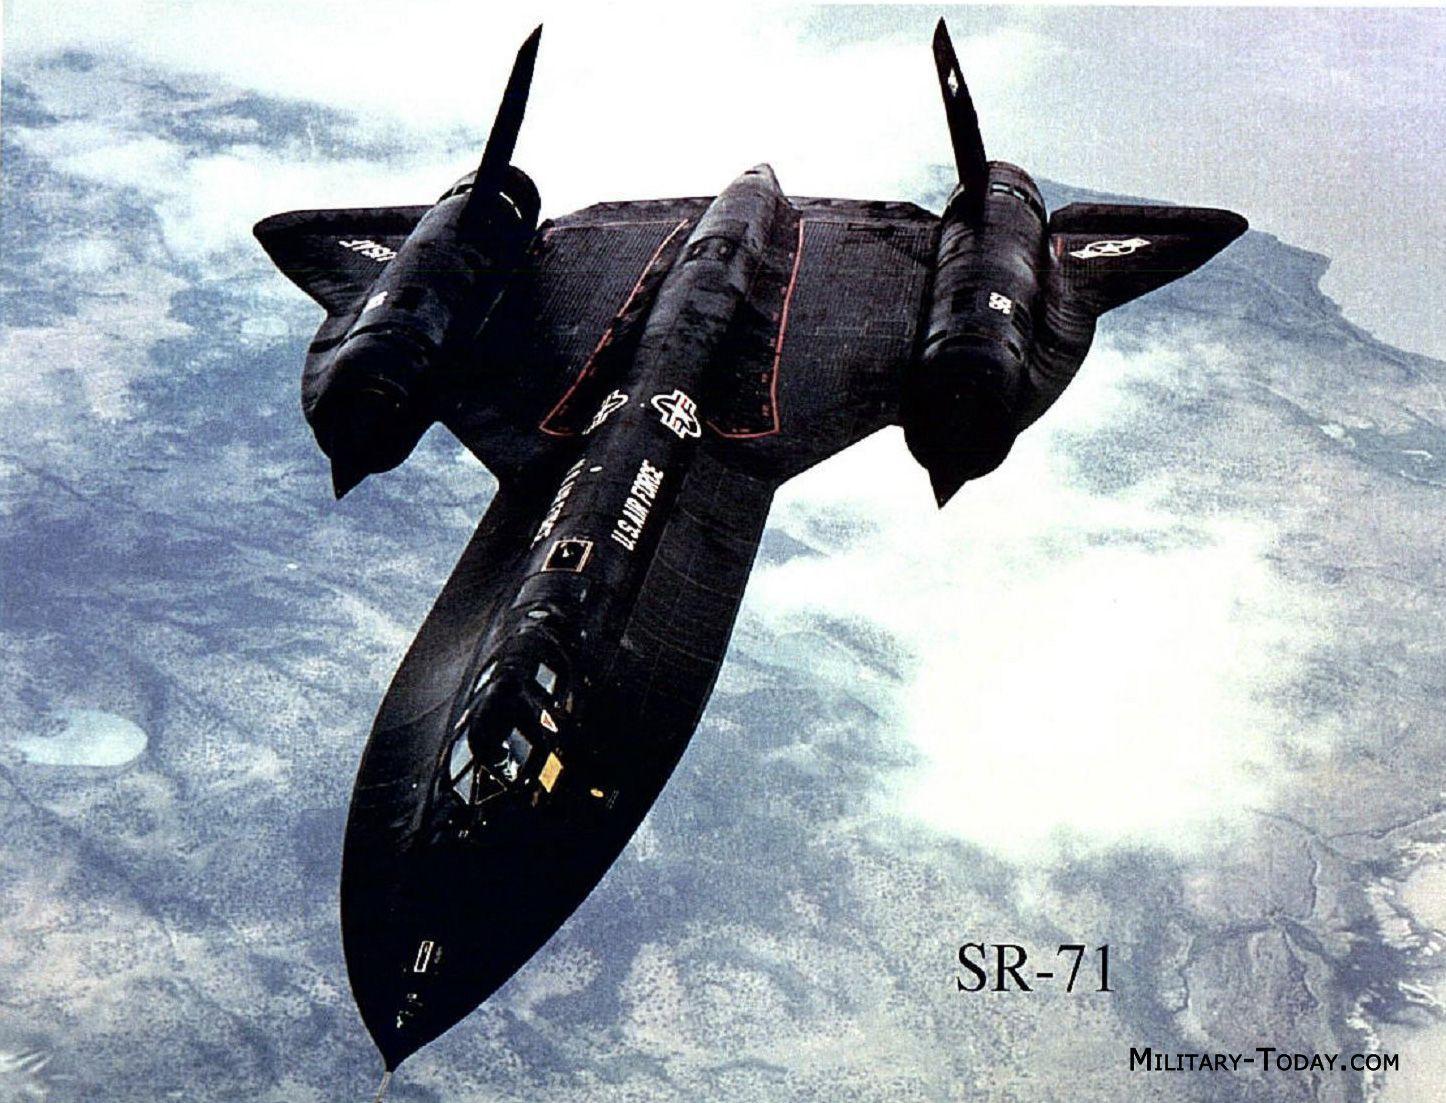 best image about Slo318 Lockheed SR71. Air